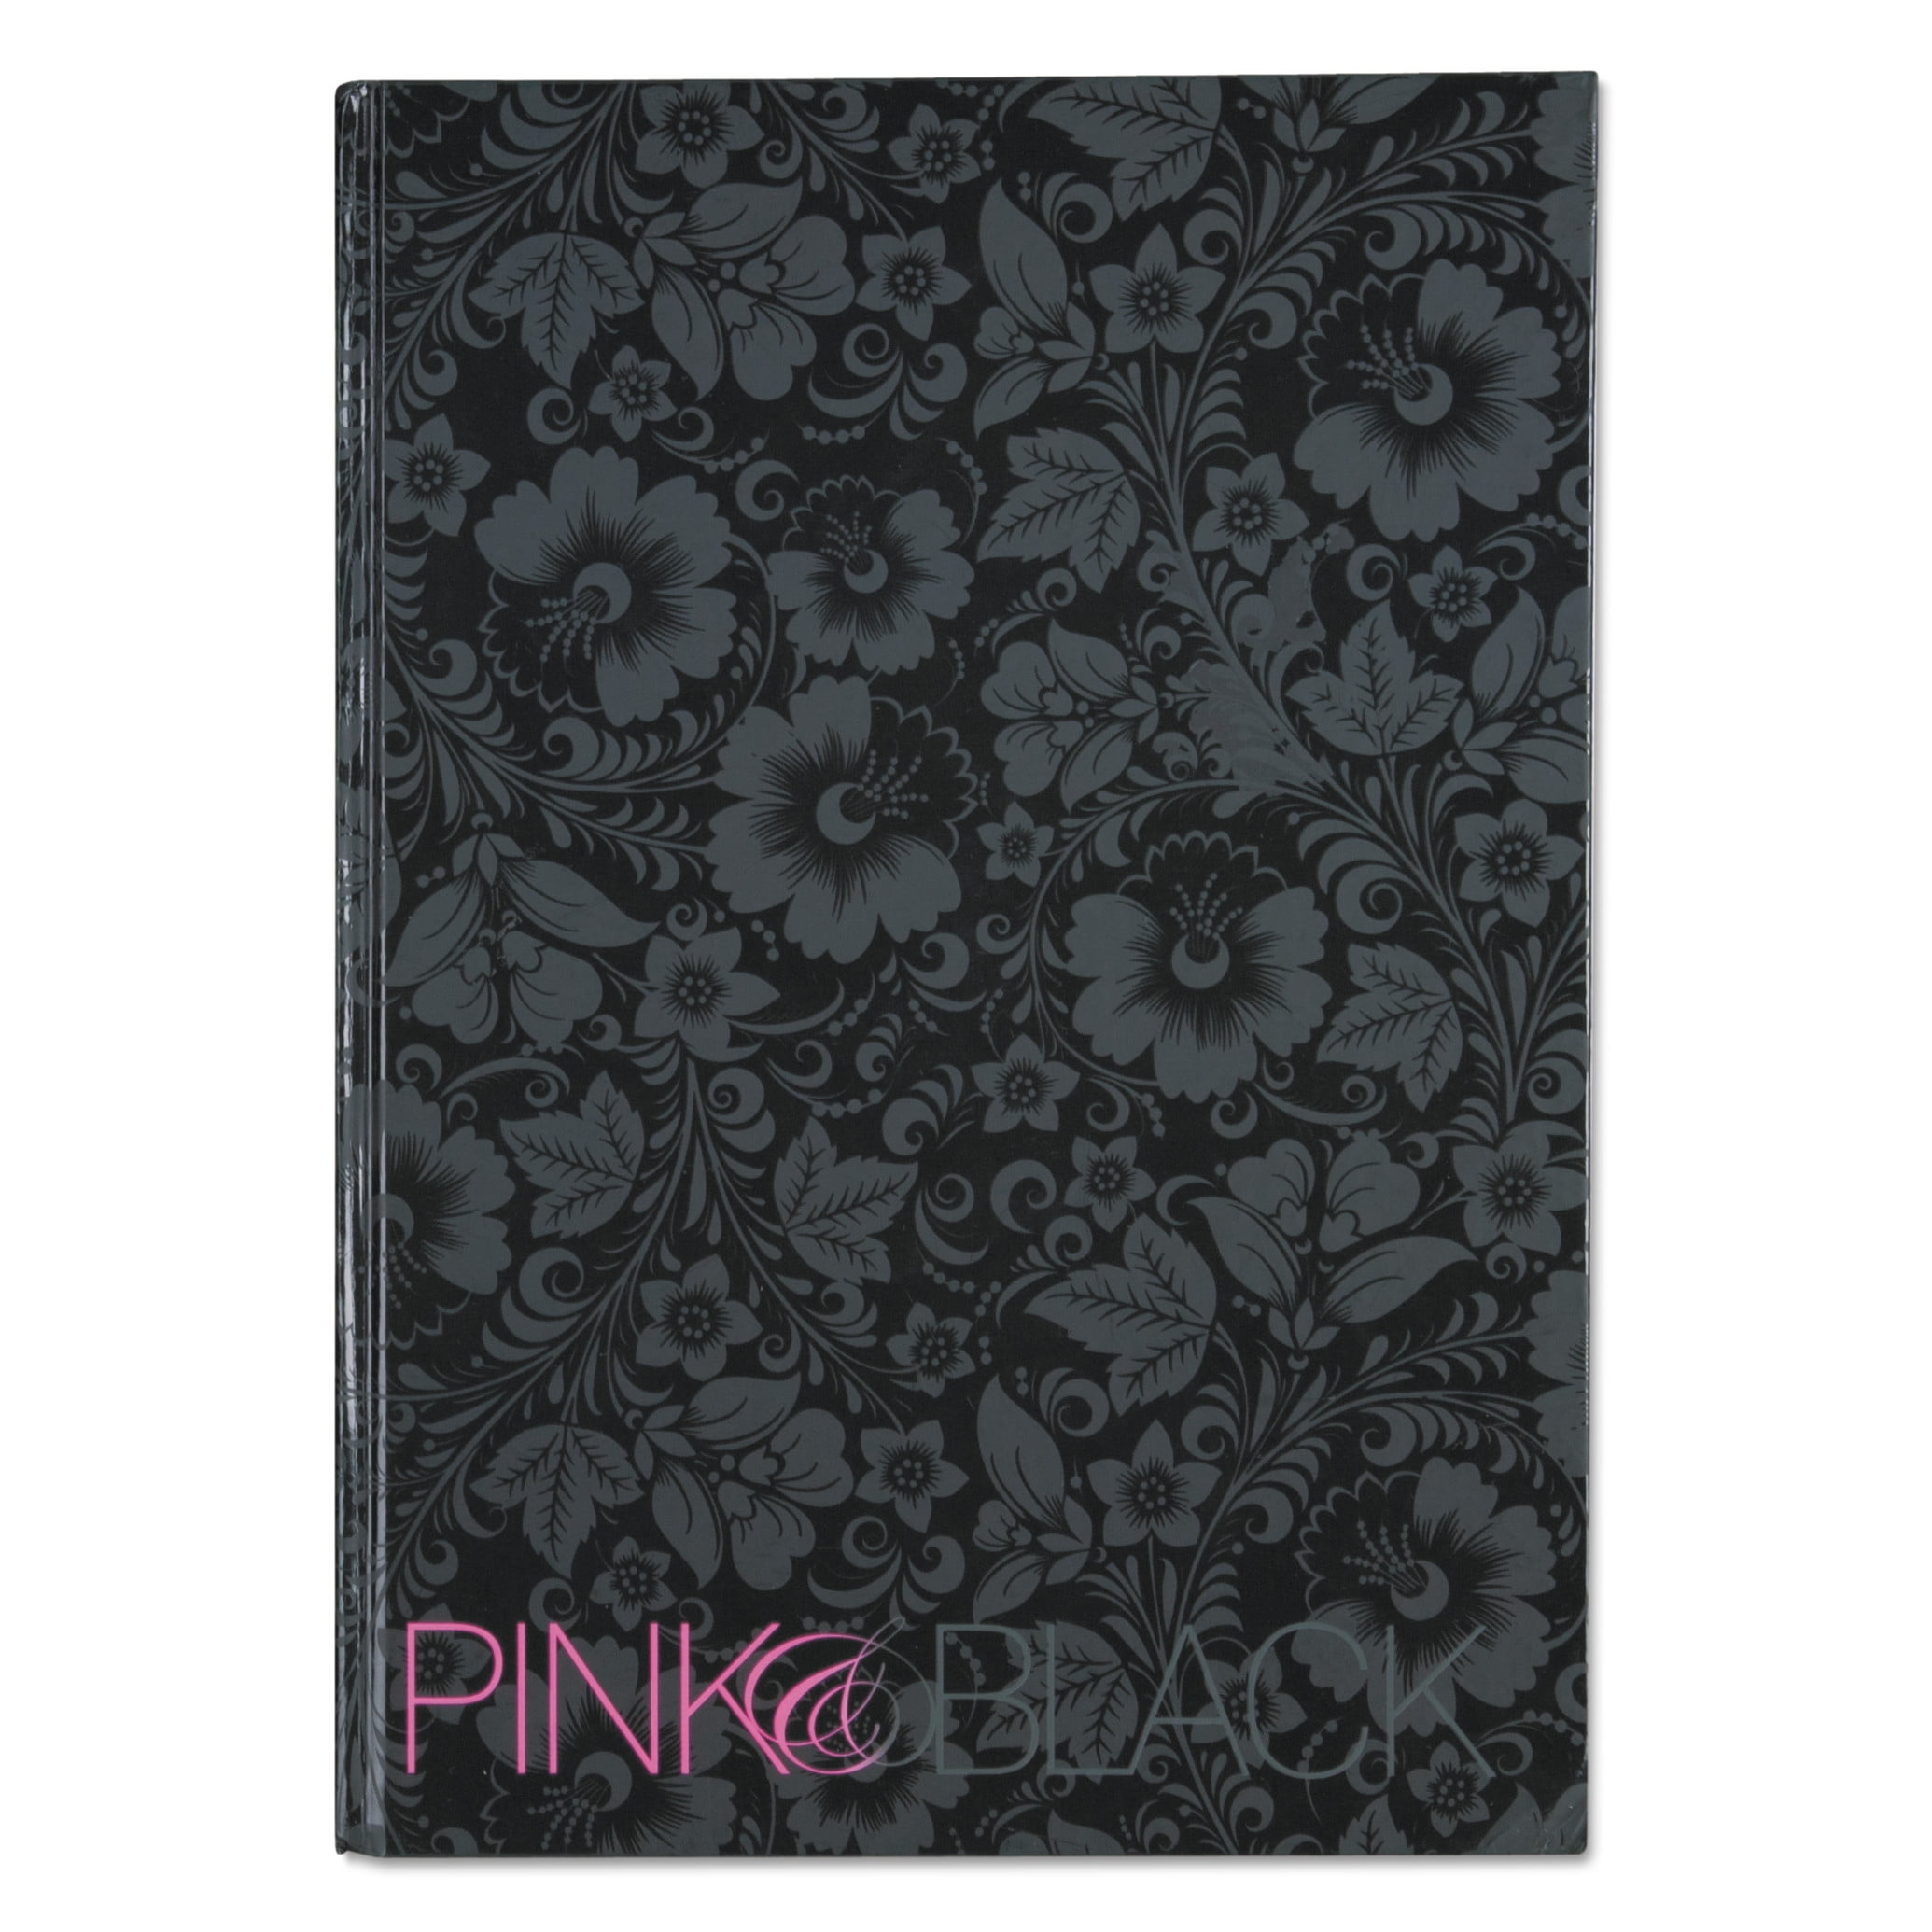 Pink & Black Prof Casebound Notebook Ruled 11 5/8 x 8 1/4 96 Sheets 400015934